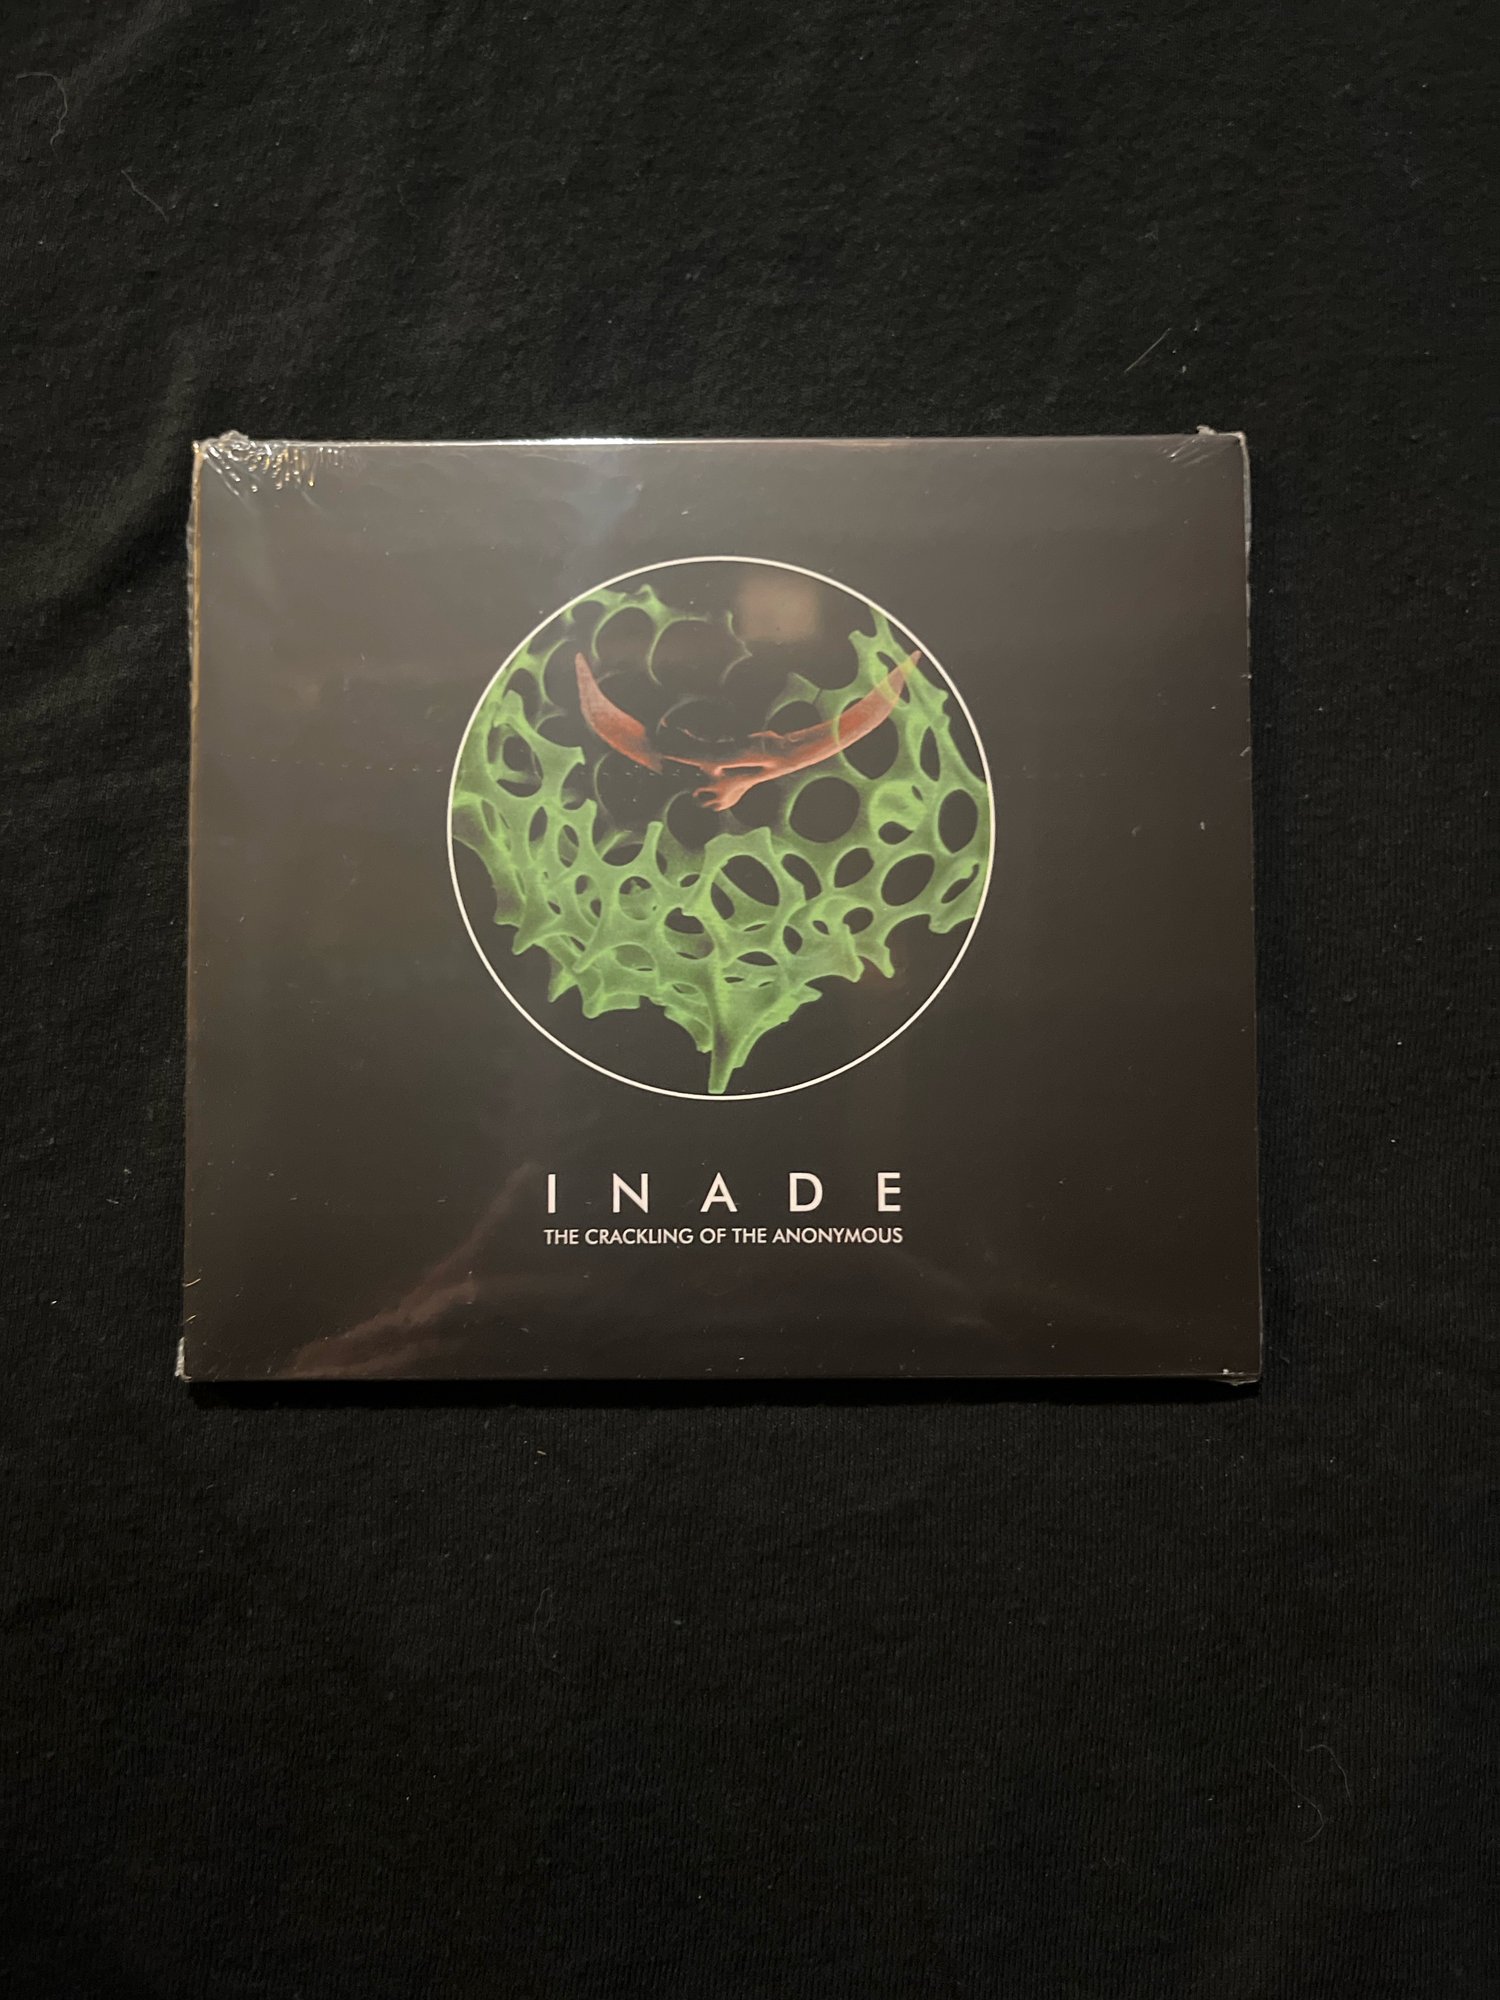 Inade - The Crackling Of The Anonymous CD (Loki)